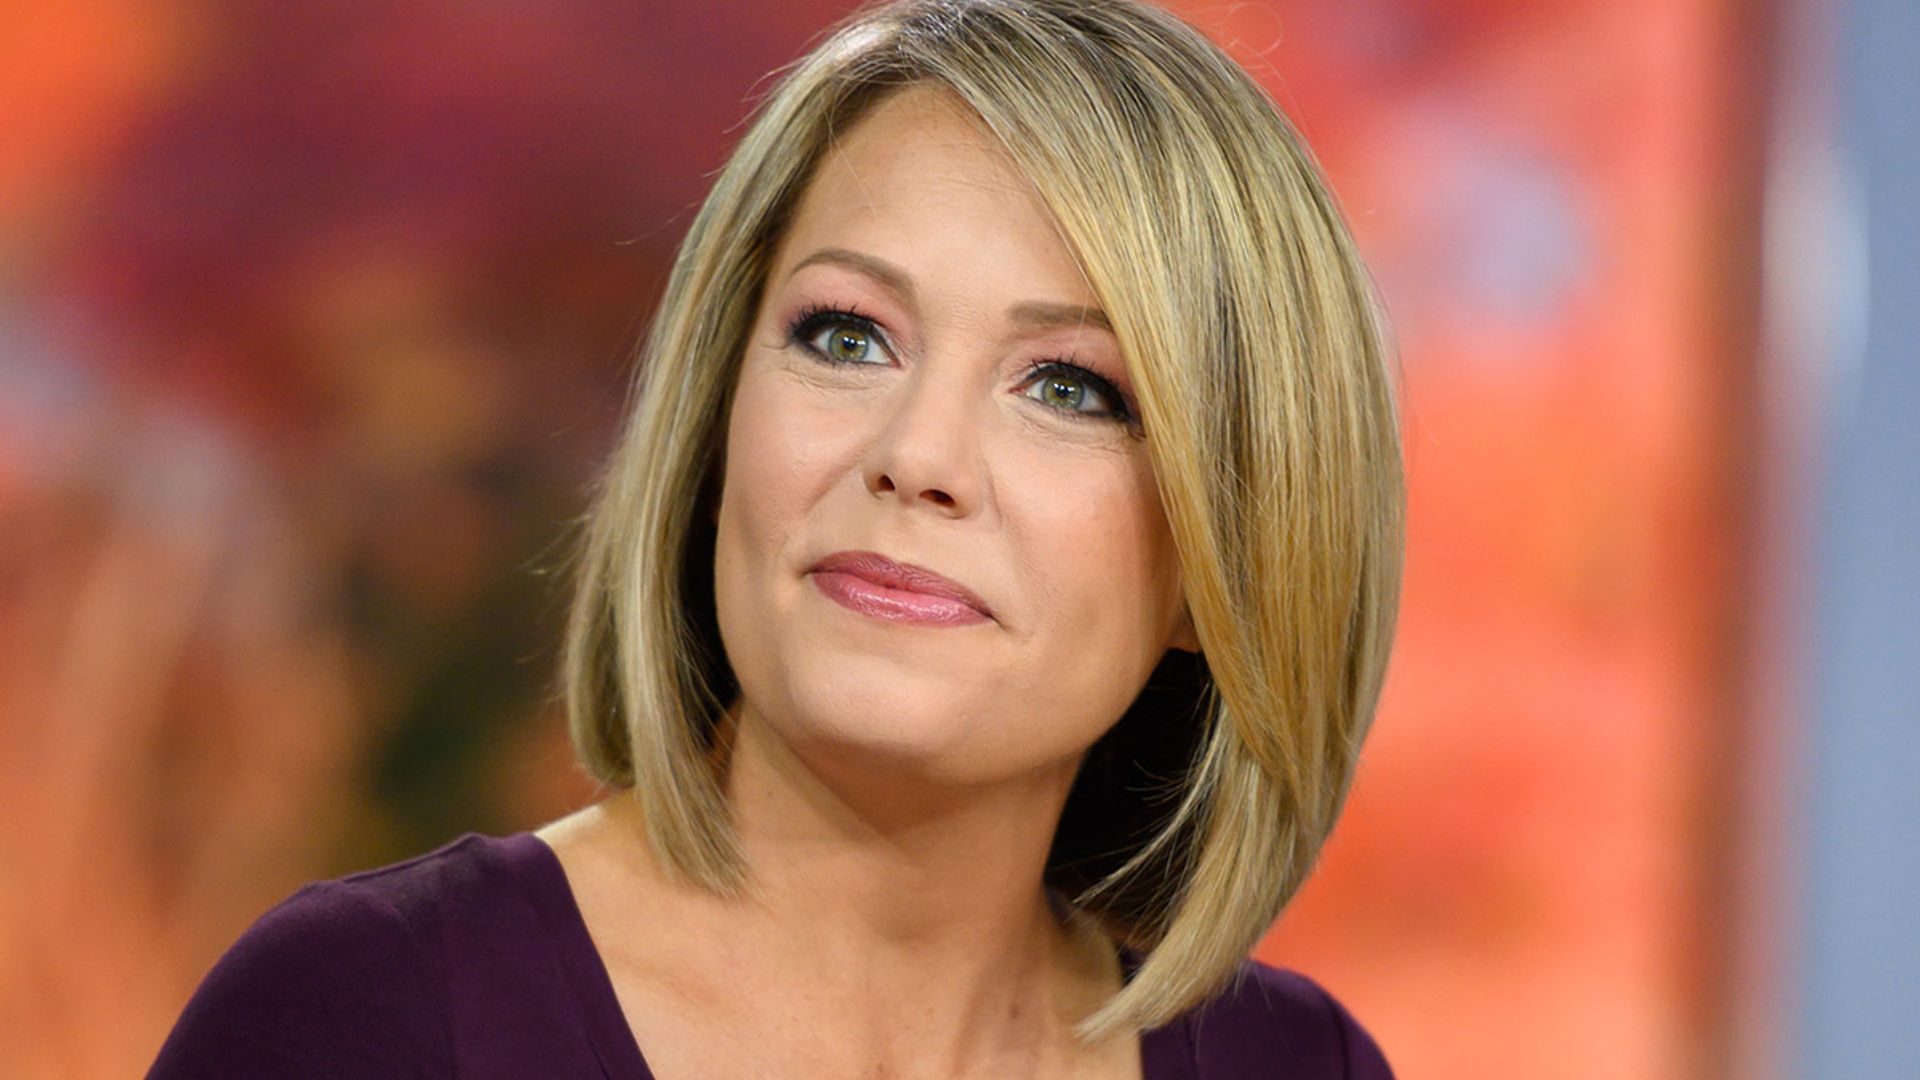 Today's Dylan Dreyer's fans offer support as she takes 'a step back to regroup' amid parenting struggle